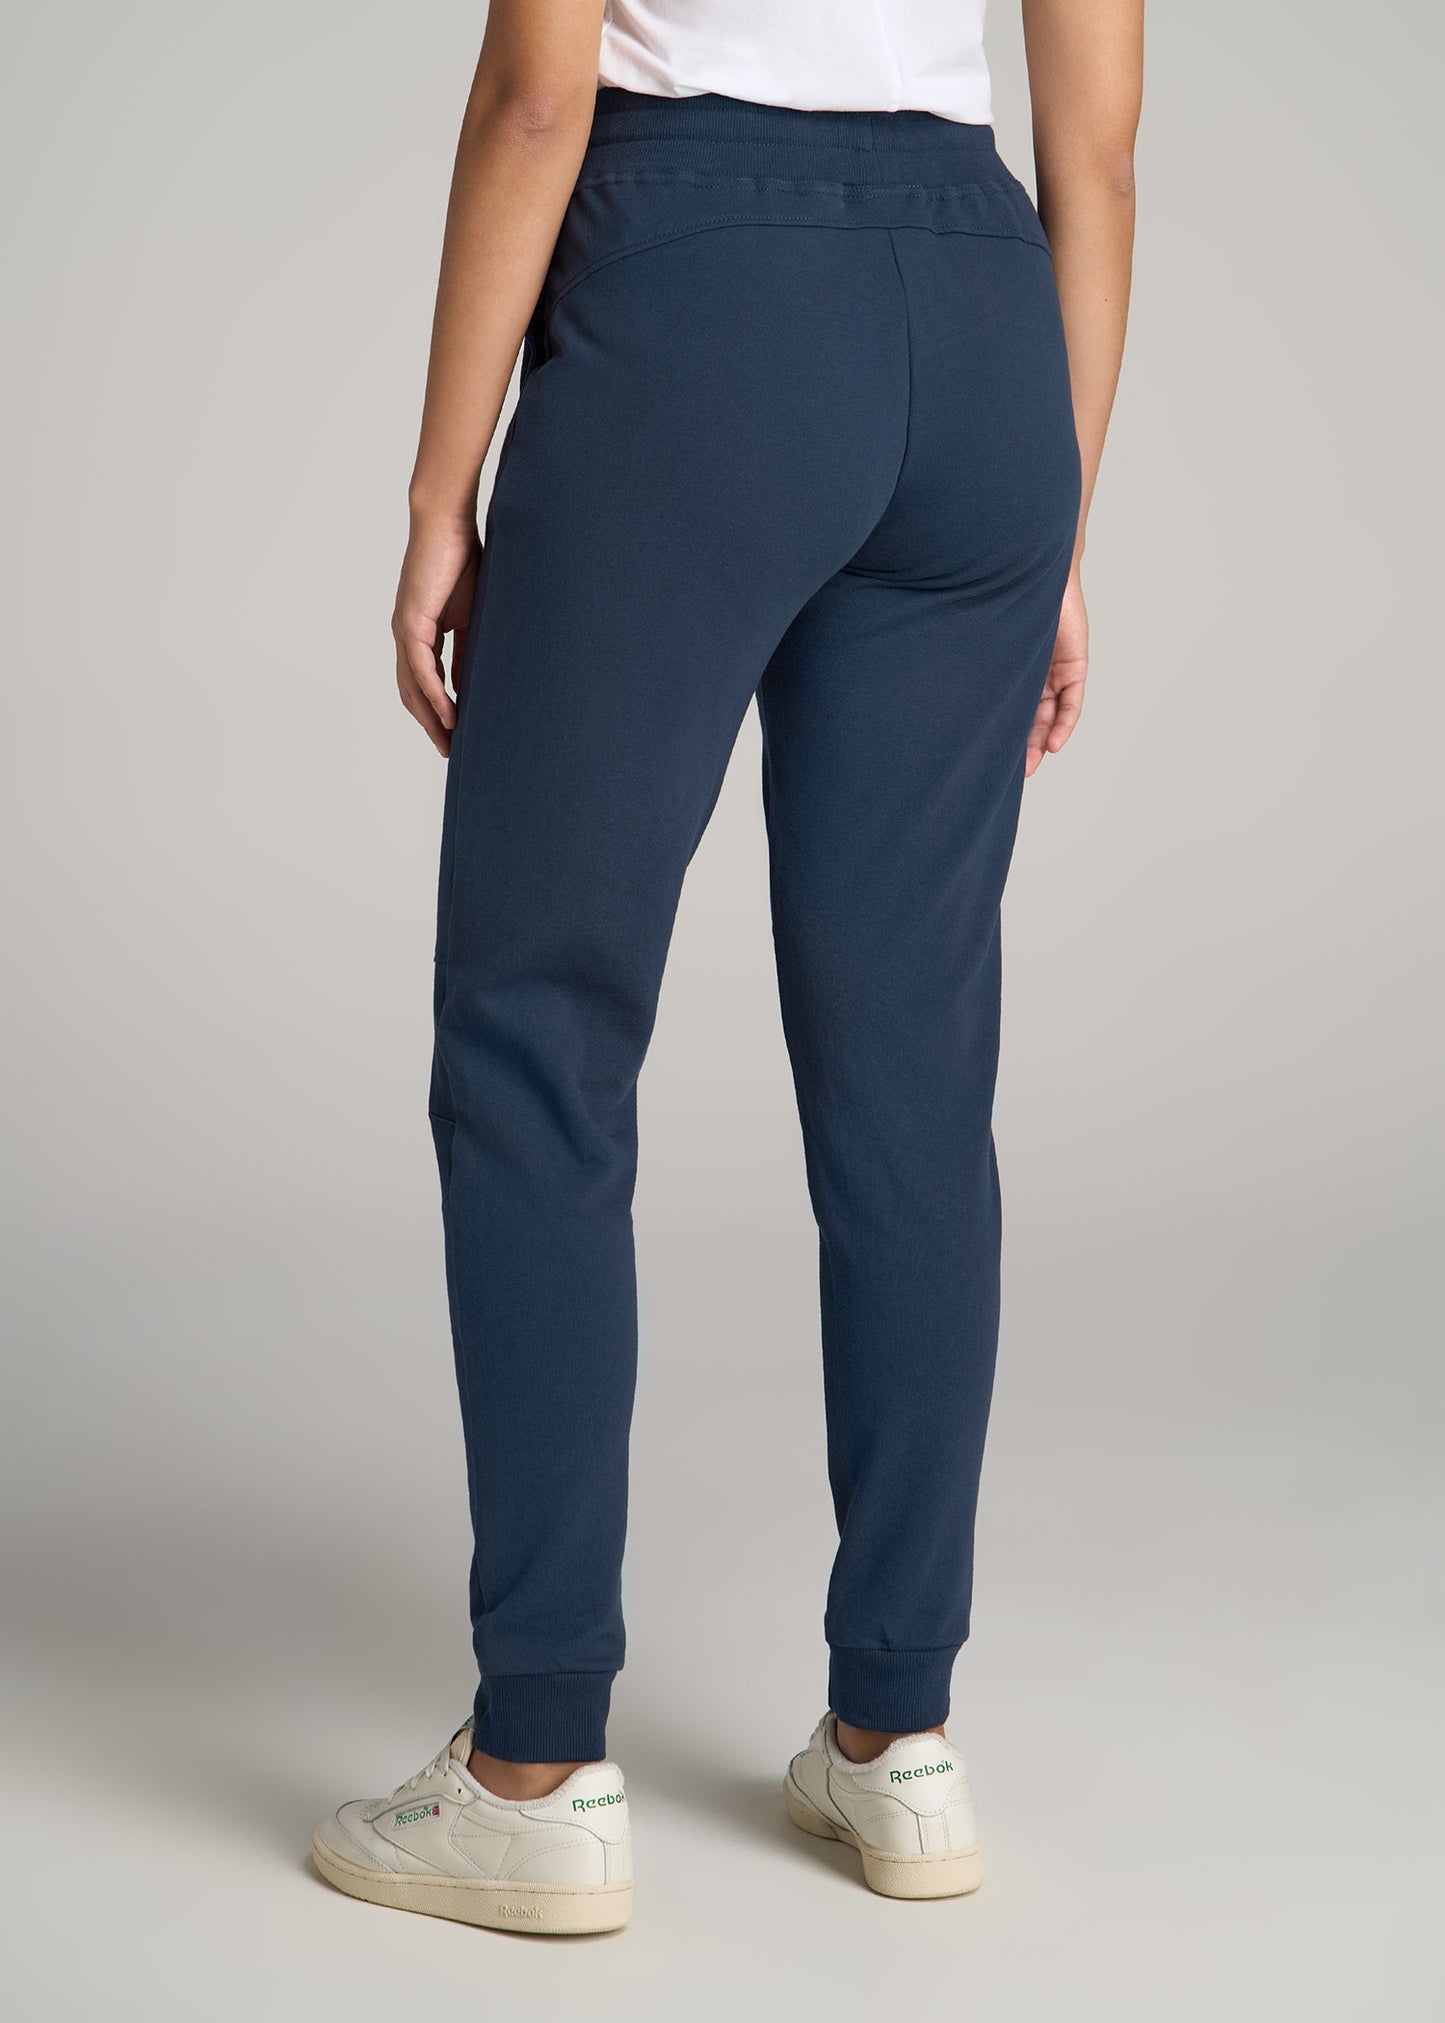 Athletic Works Women's Athleisure French Terry Relaxed Fit Sweatpants 